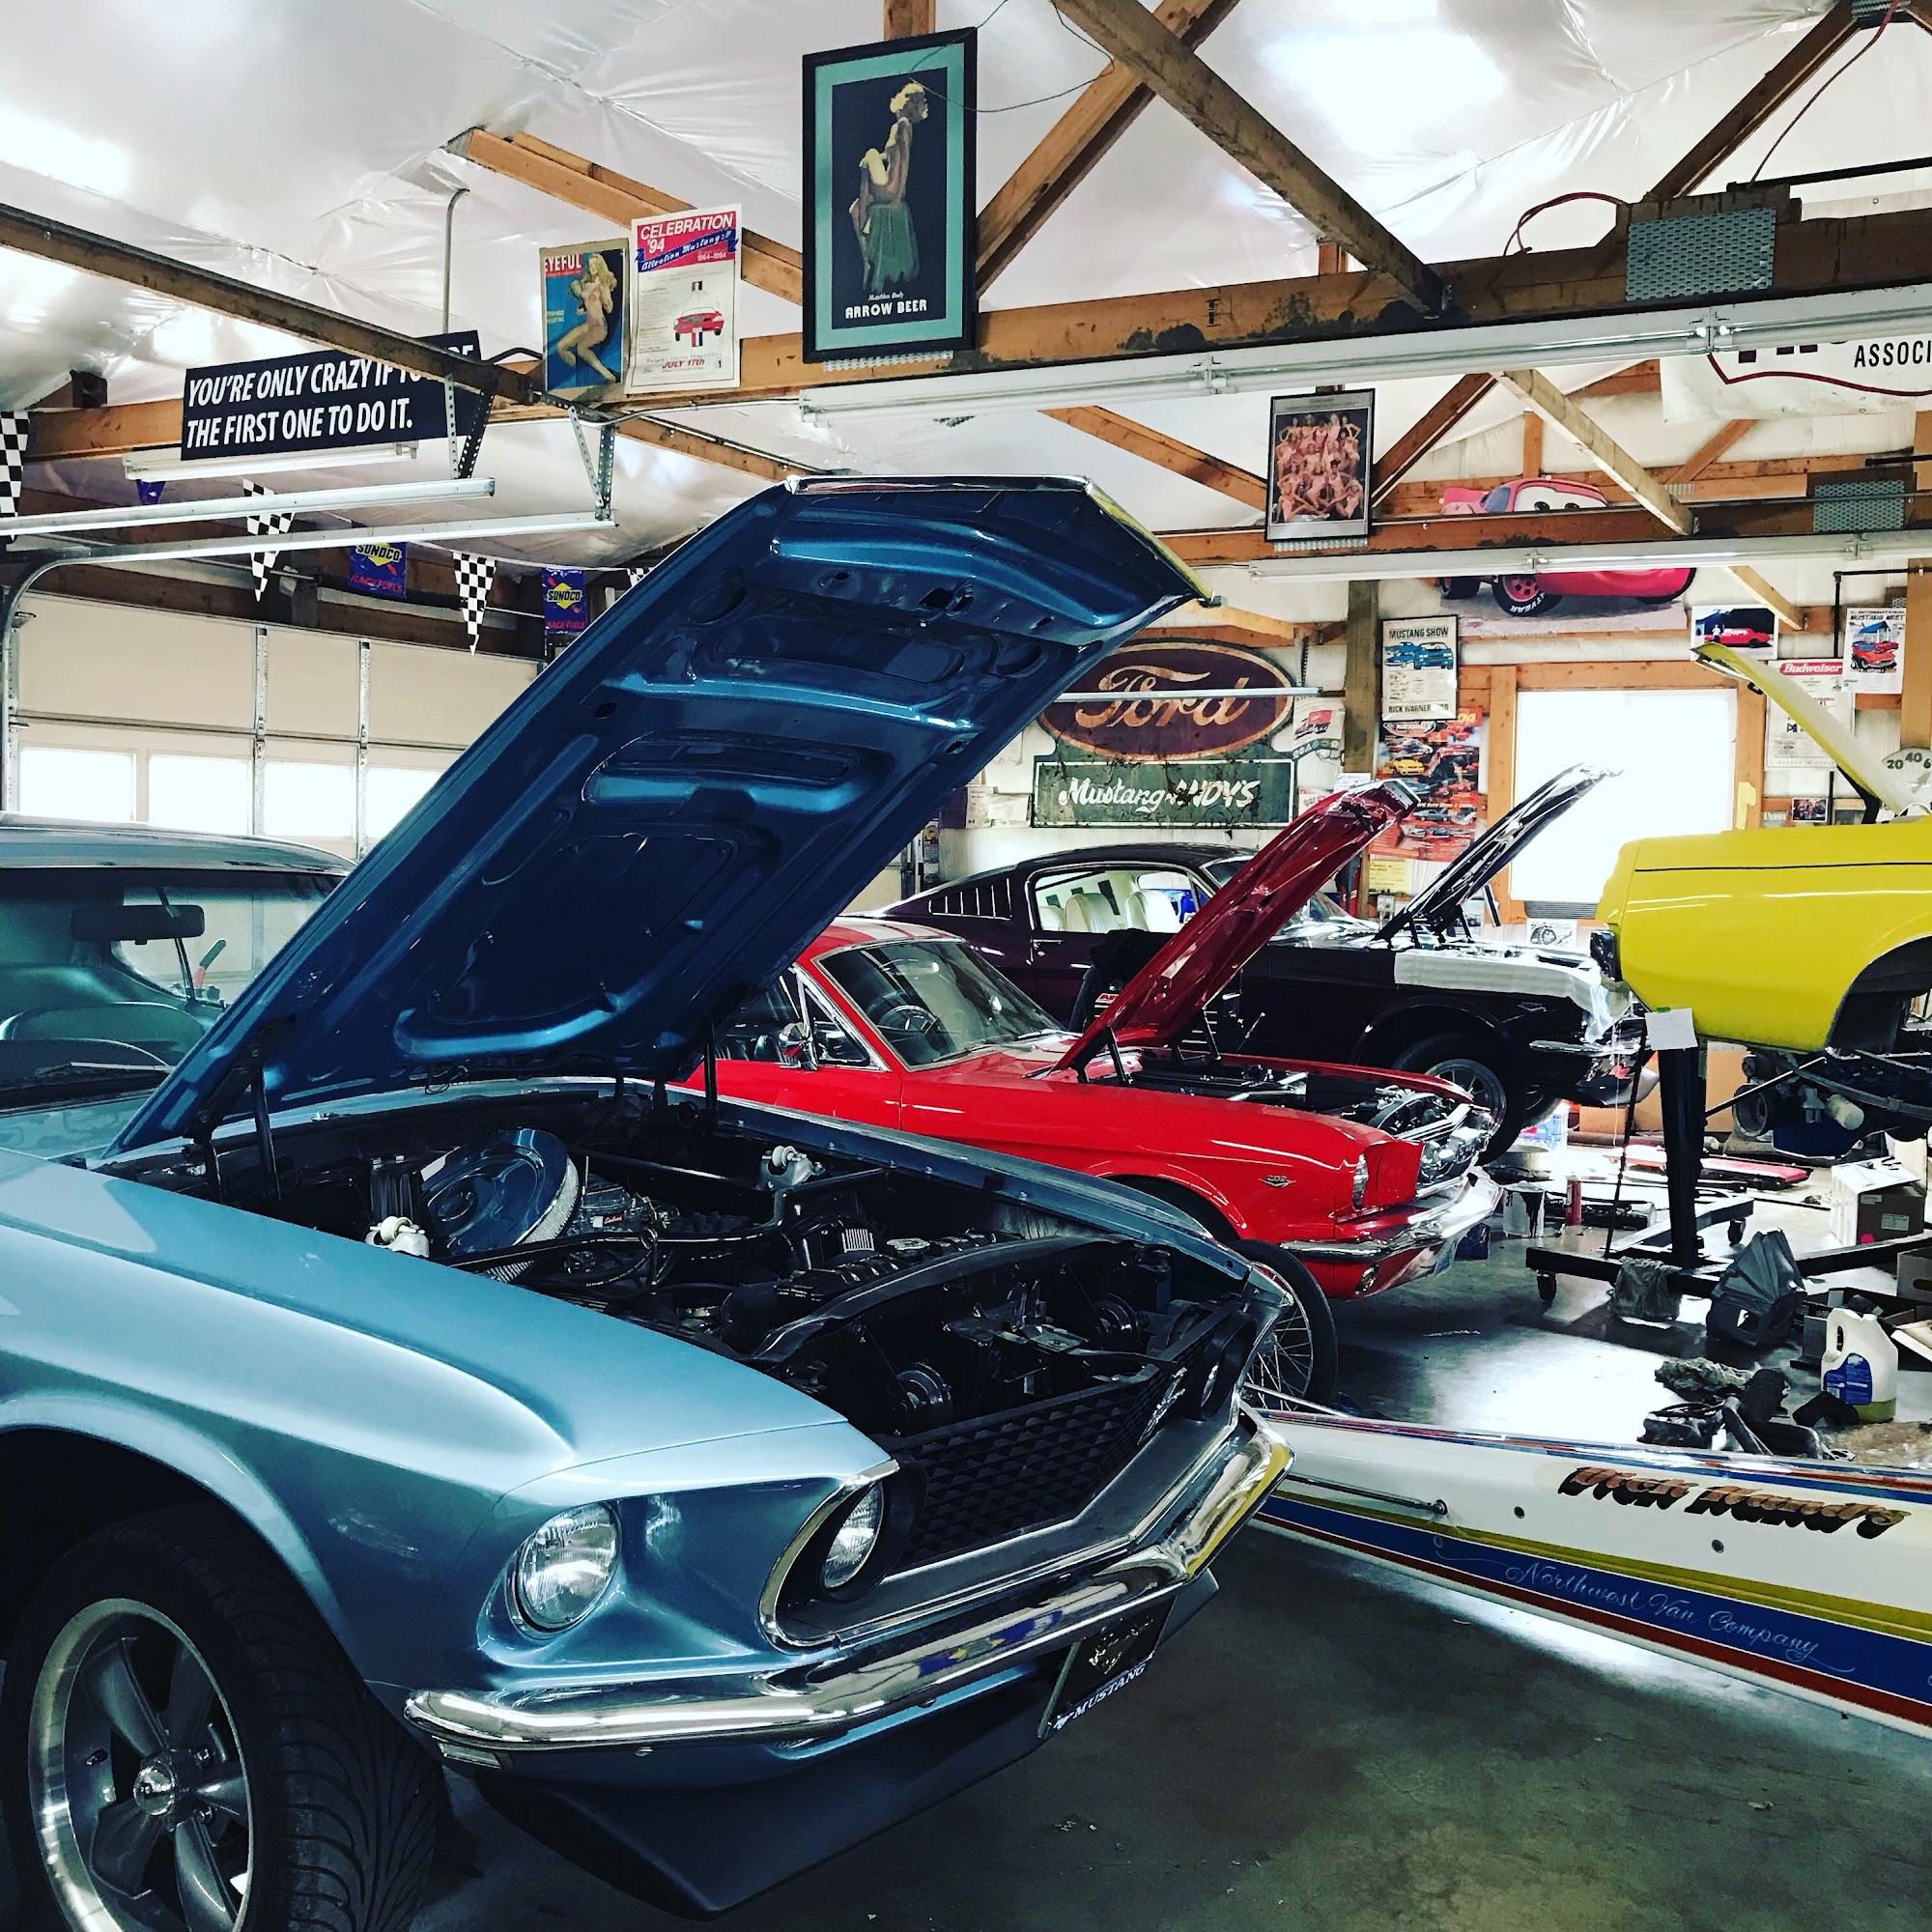 Andy's Classic Mustangs